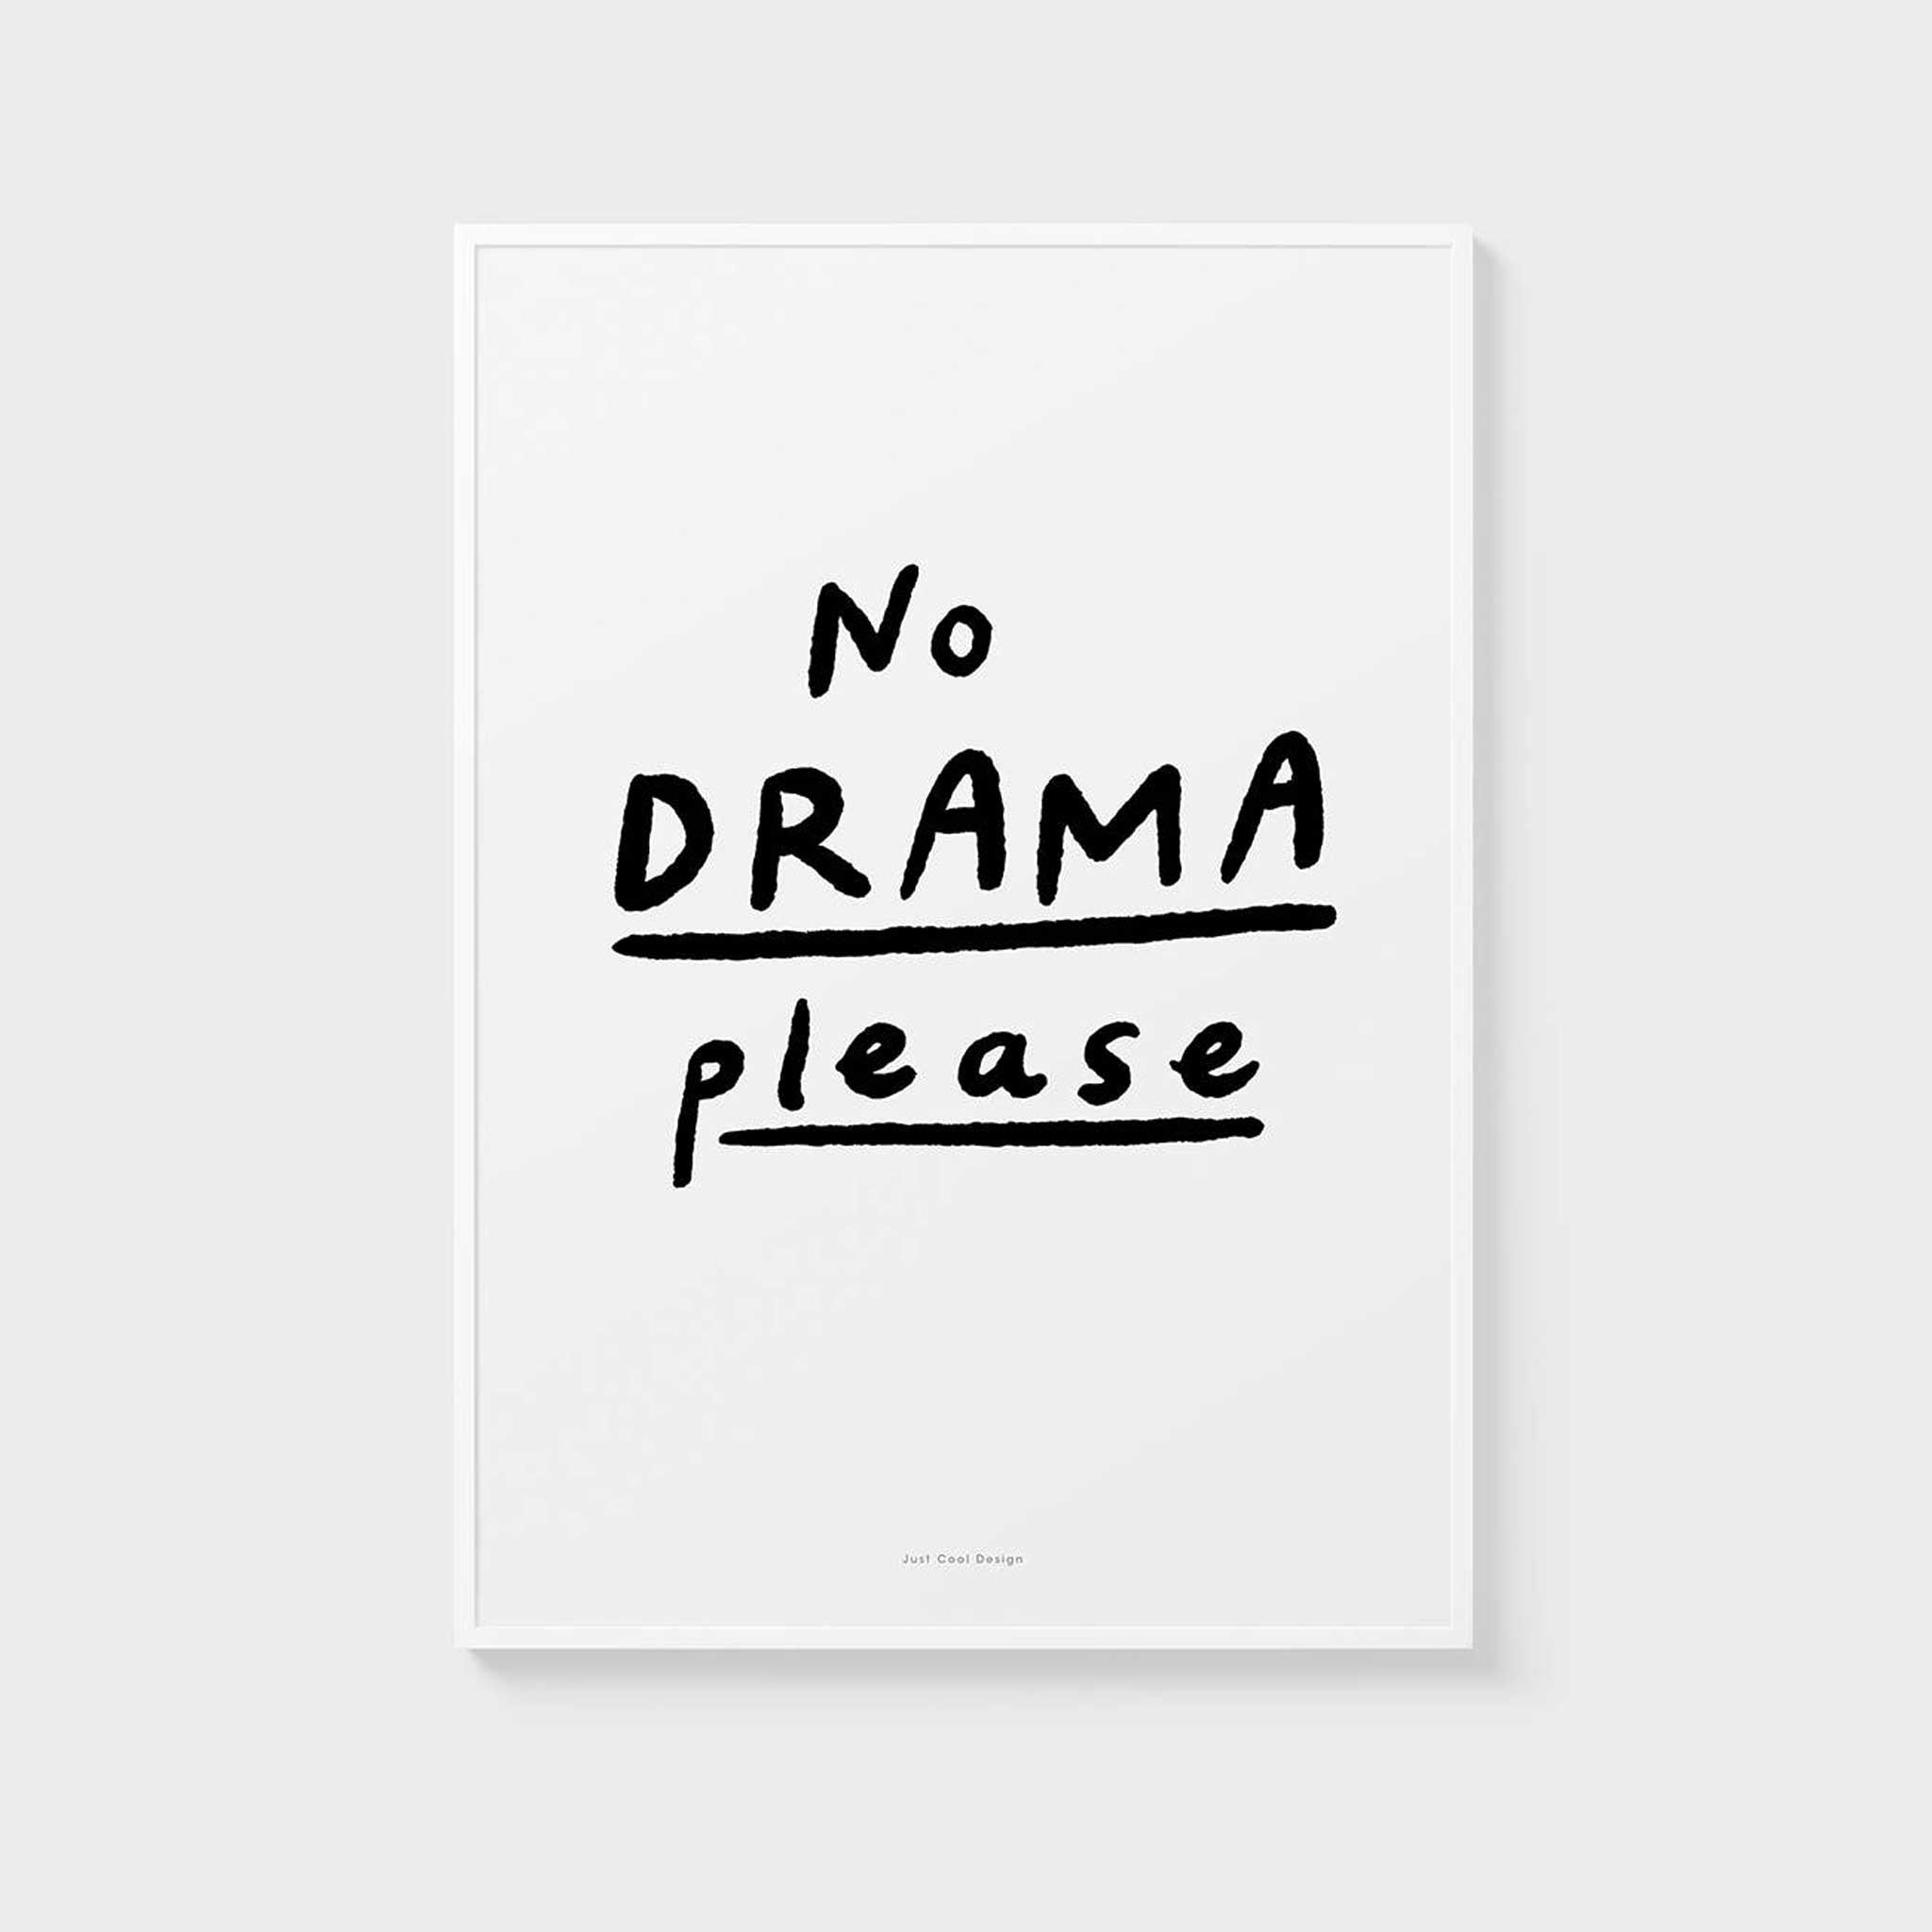 NO DRAMA PLEASE | Zitate POSTER | A4 Format | Just Another Cool Design